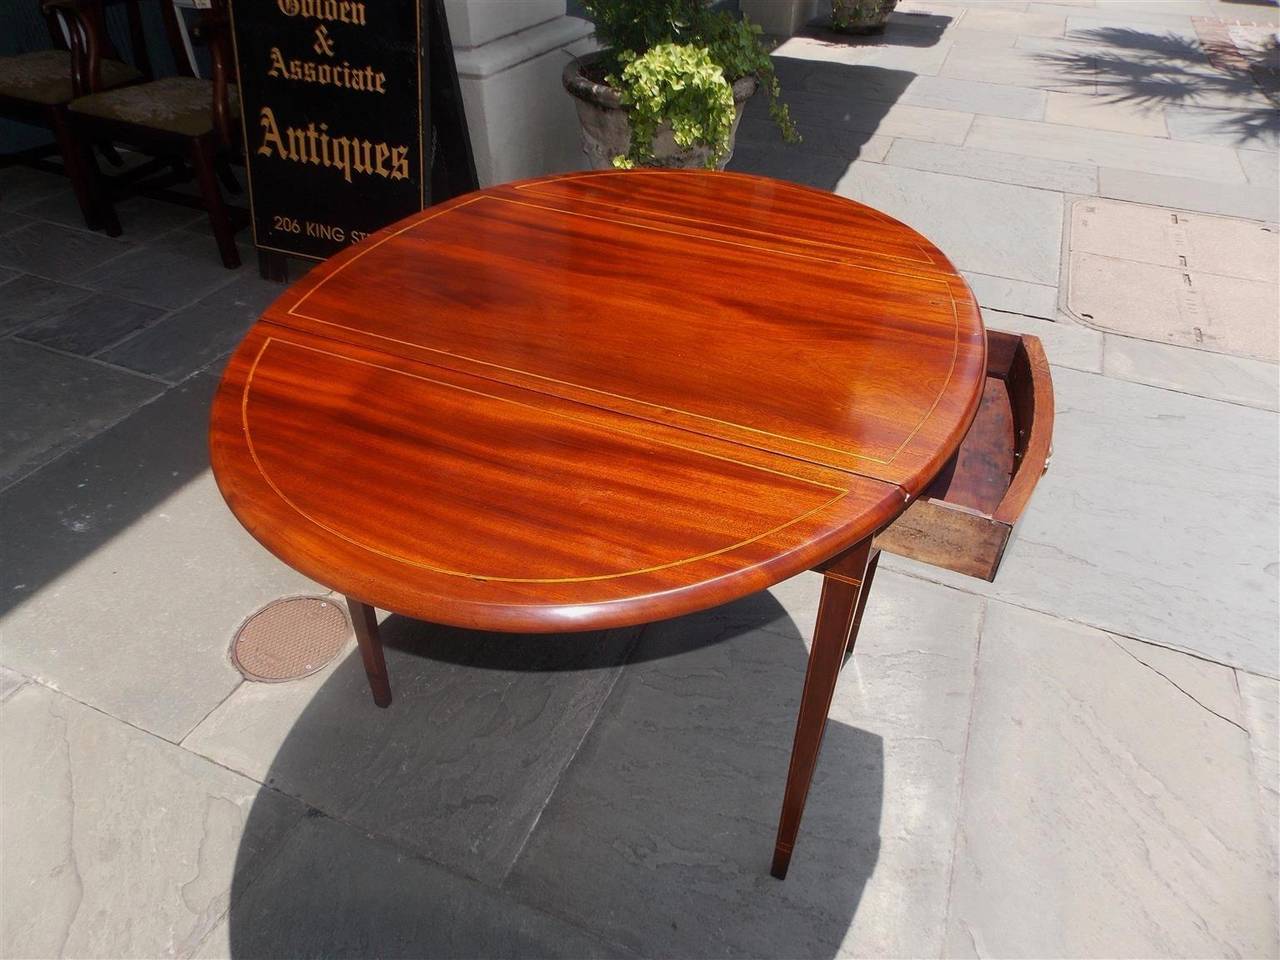 American Hepplewhite Mahogany and Satinwood Pembroke Table, VA, Circa 1790 In Excellent Condition For Sale In Hollywood, SC